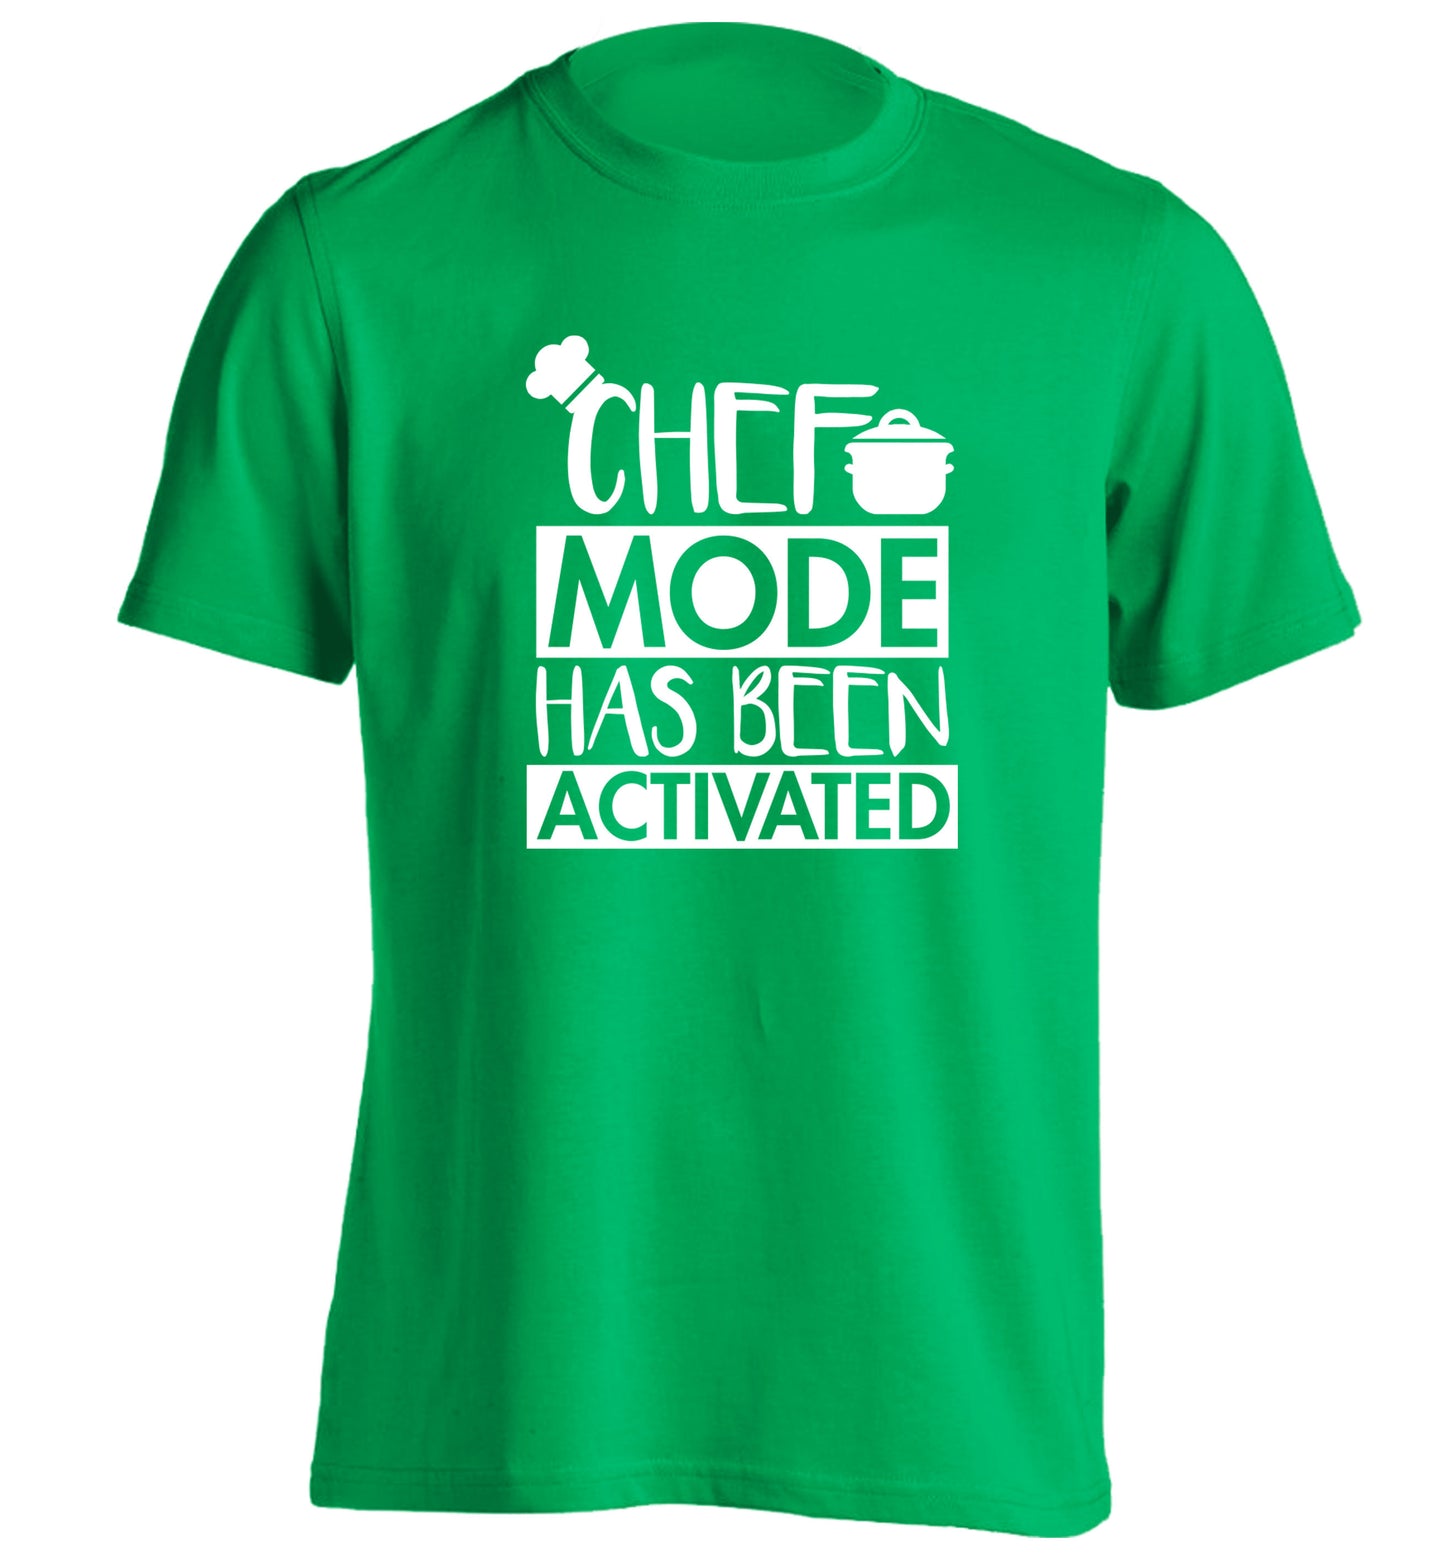 Chef mode has been activated adults unisex green Tshirt 2XL